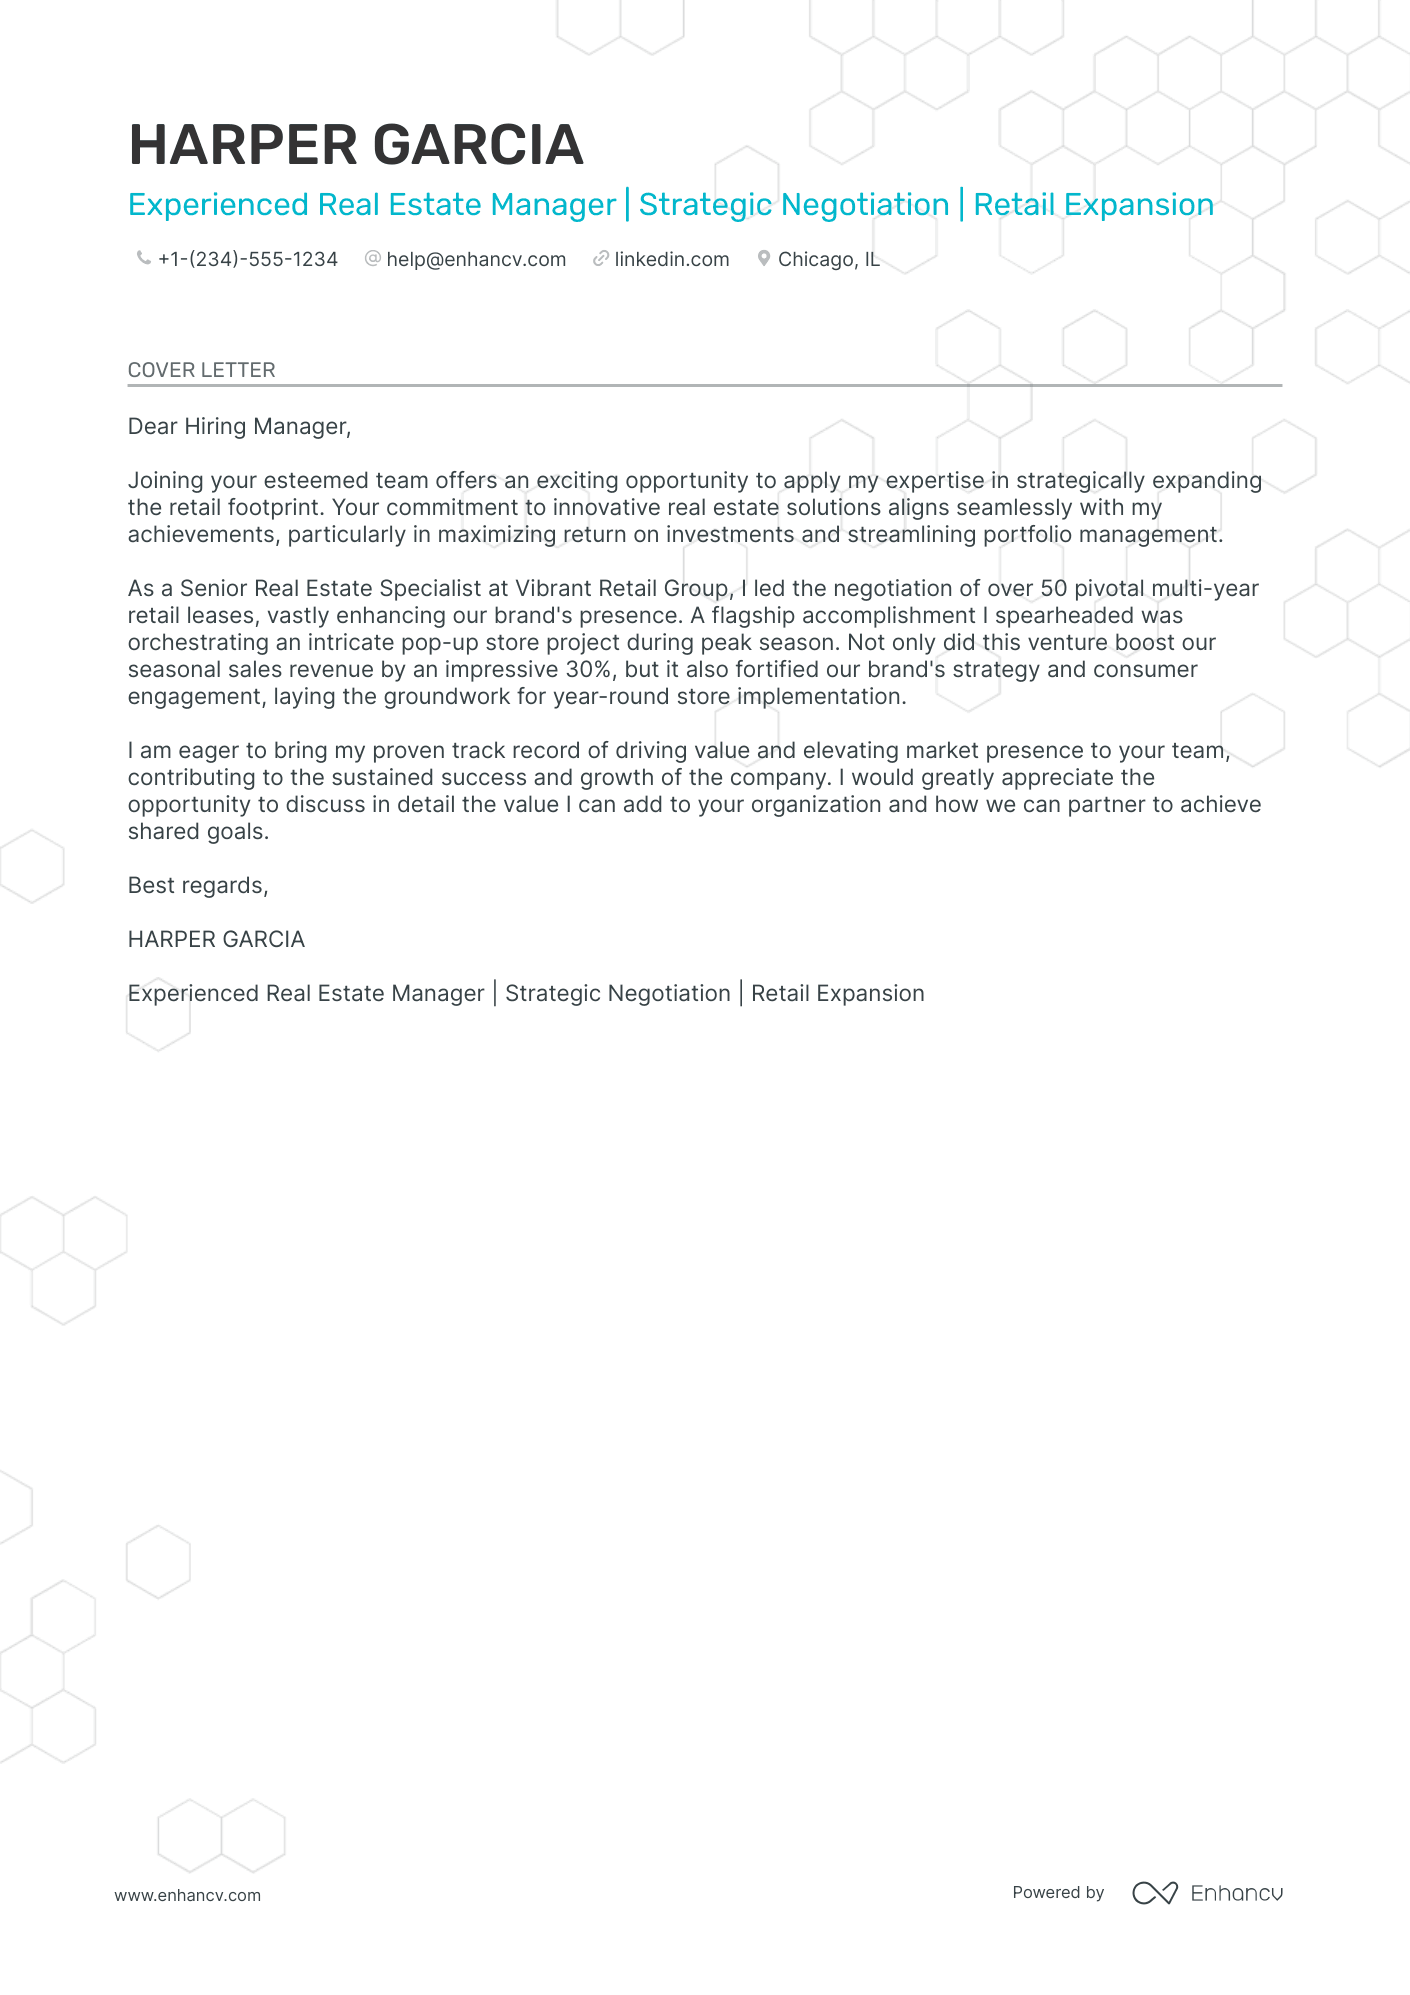 real estate agent cover letter